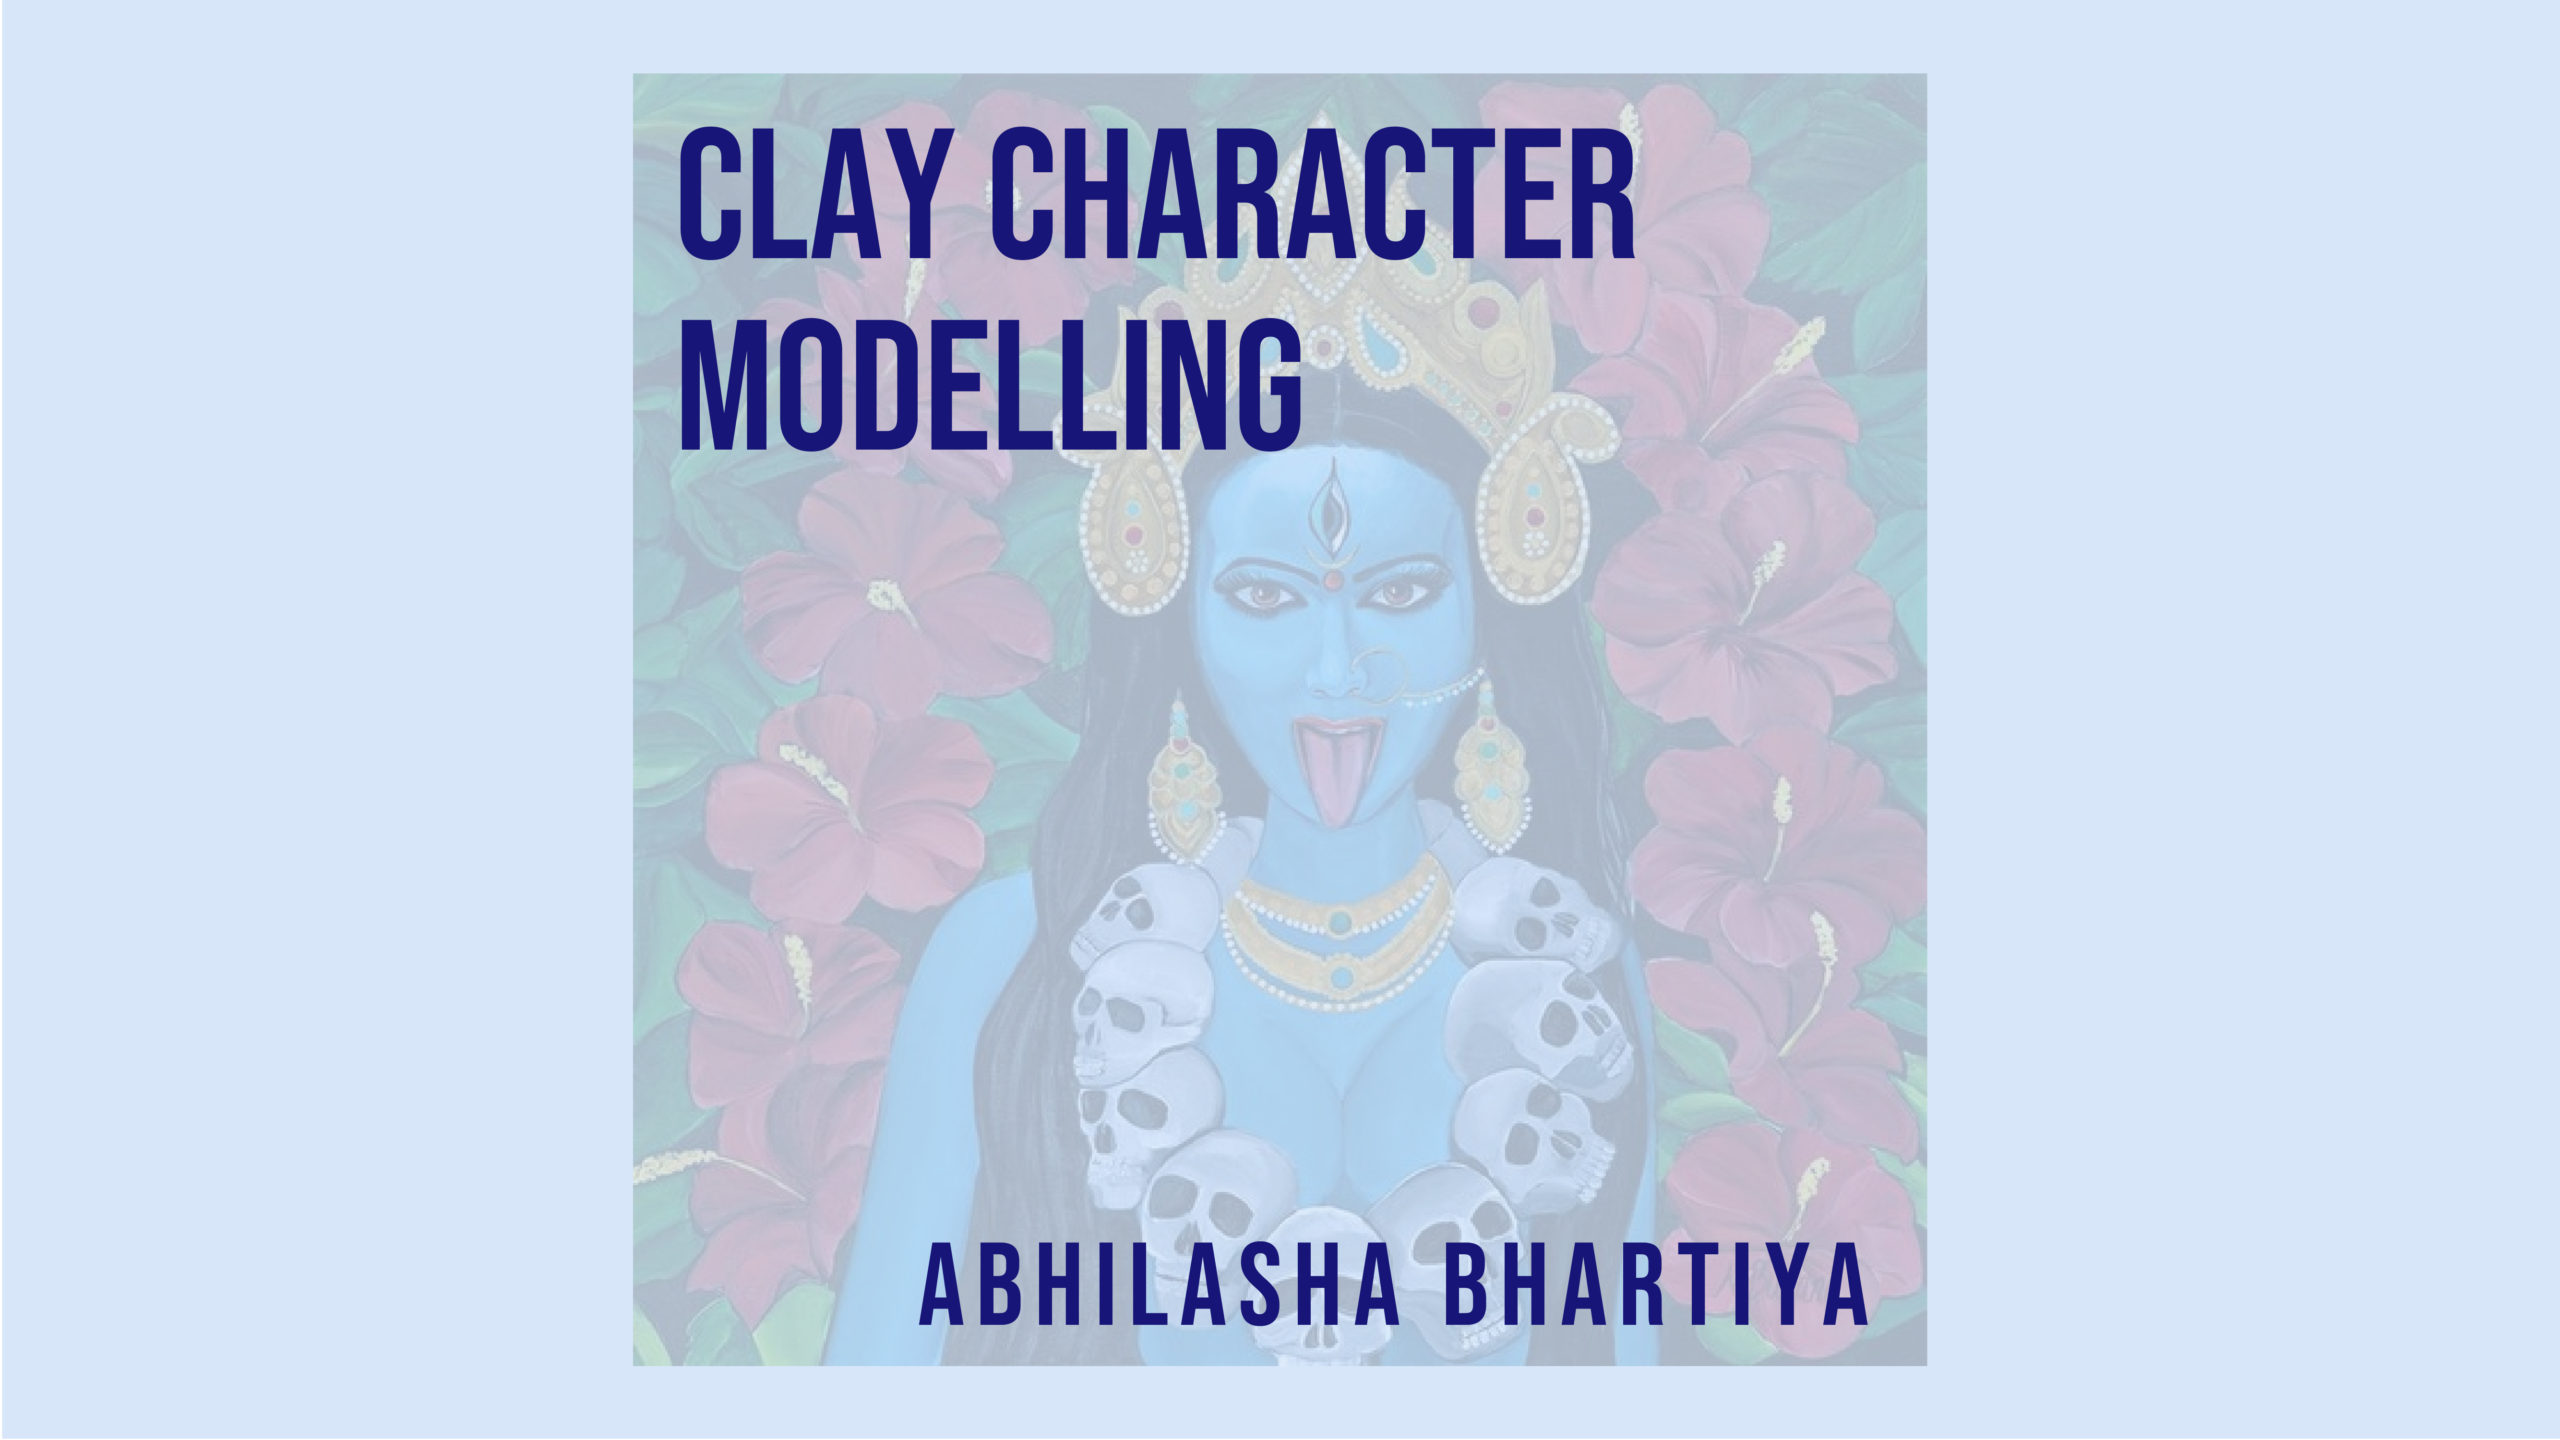 Clay Character Modelling Workshop